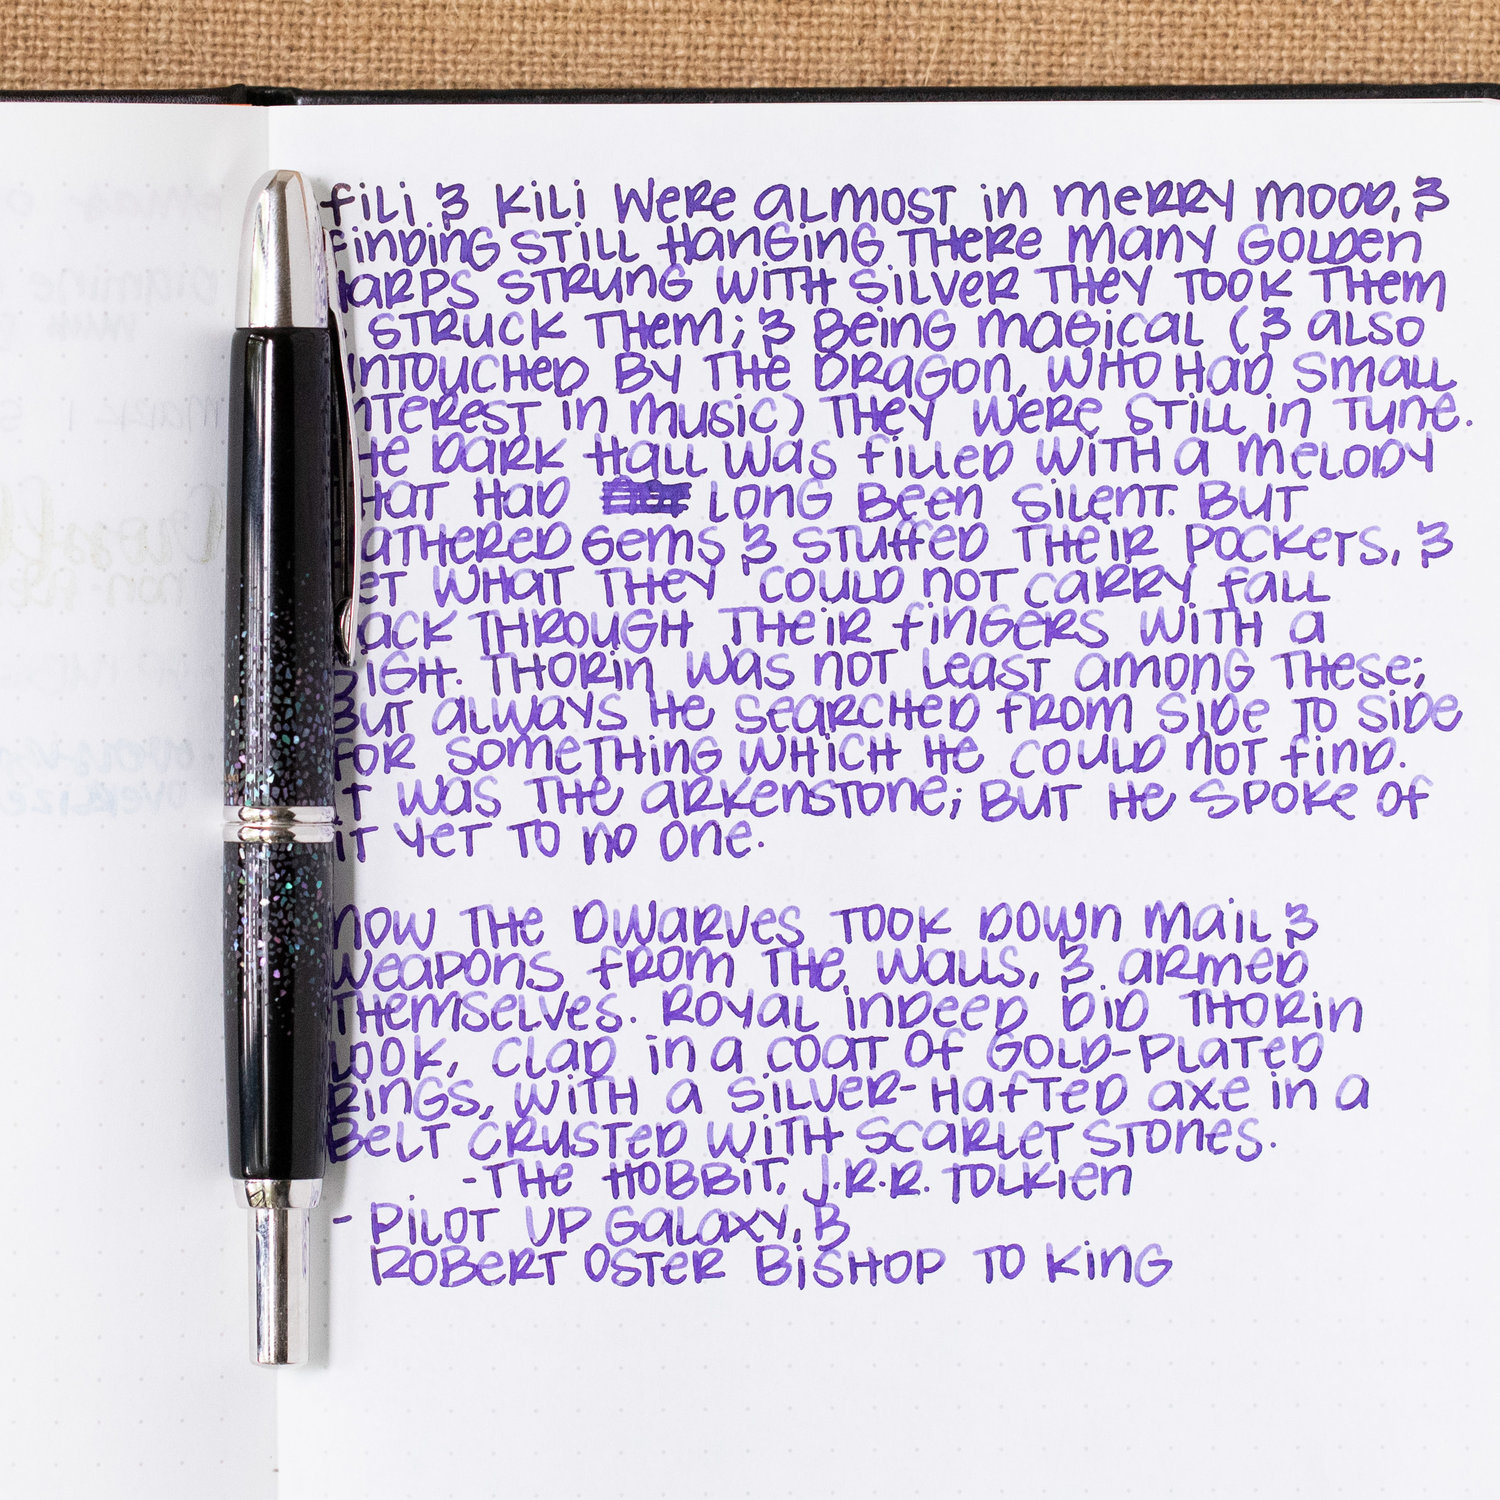 Ink Review #731: Robert Oster Bishop to King — Mountain of Ink